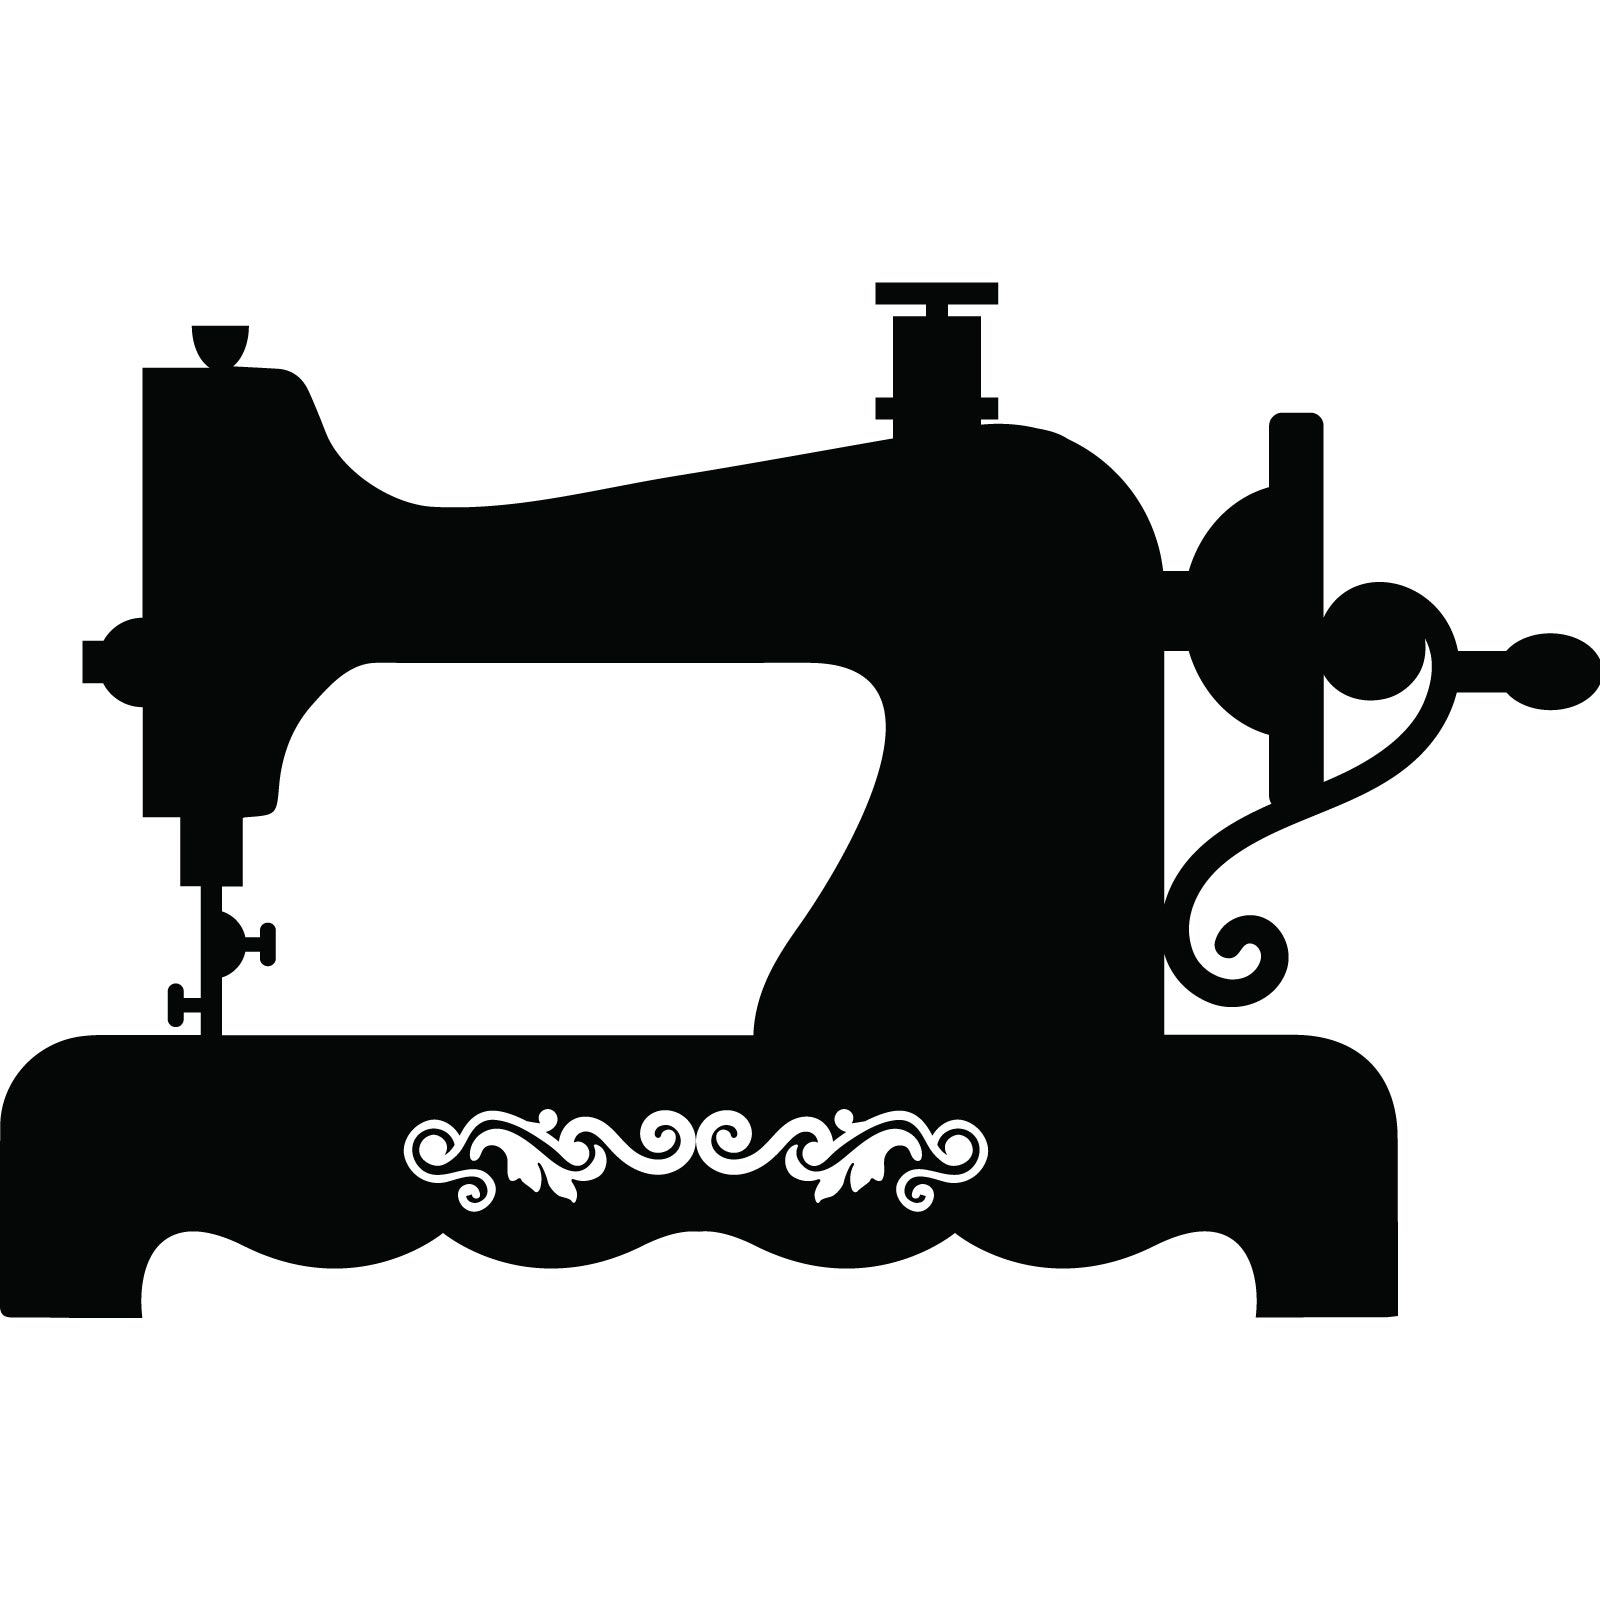 Old Style Sewing Machine Vintage Wall Sticker Decal | eBay